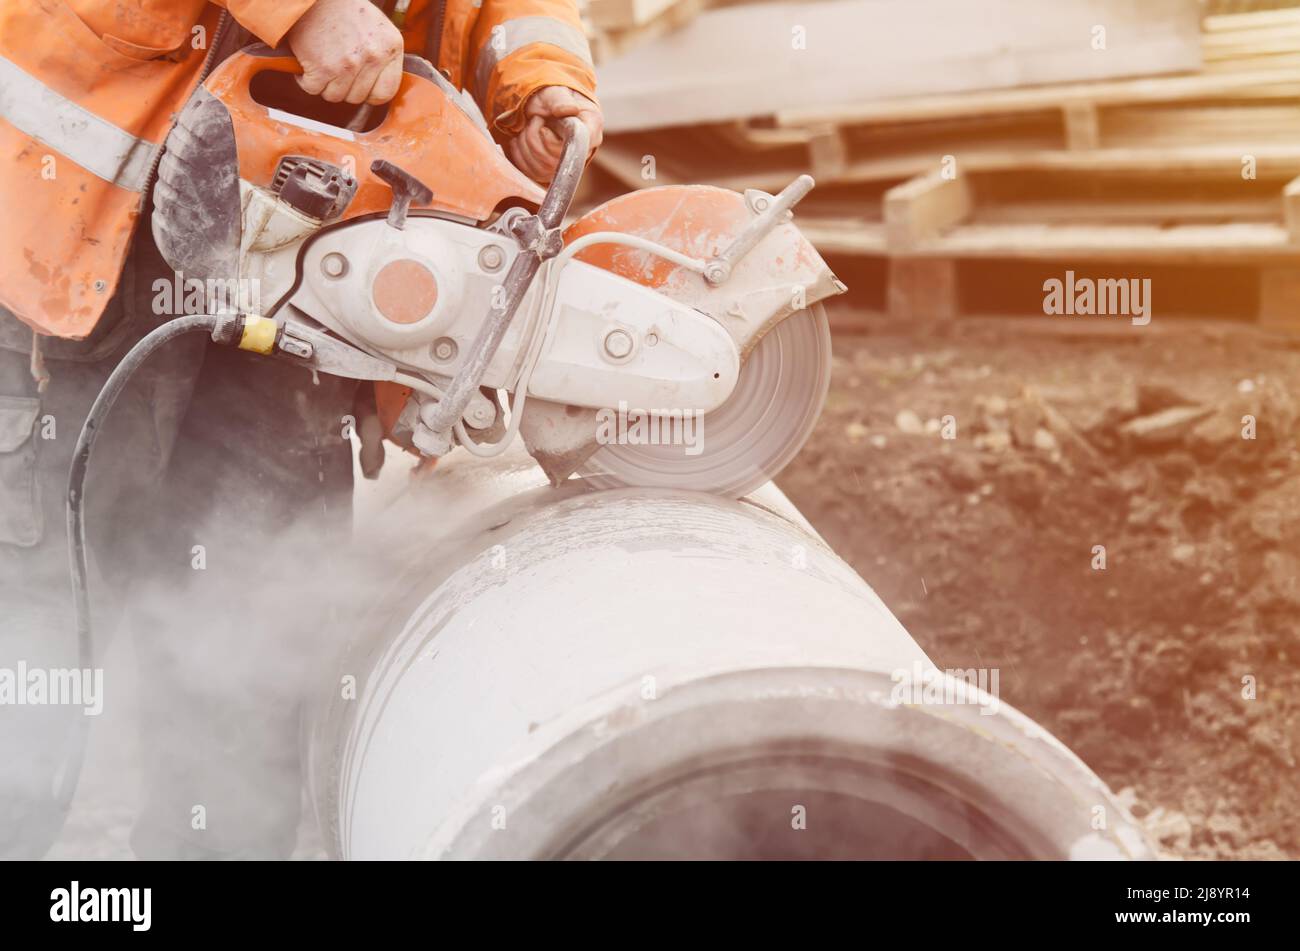 A worker at the construction site cutting a concrete drainage pipe with a petrol concrete saw. Builder covered in a hazardous dust cloud as safety pro Stock Photo